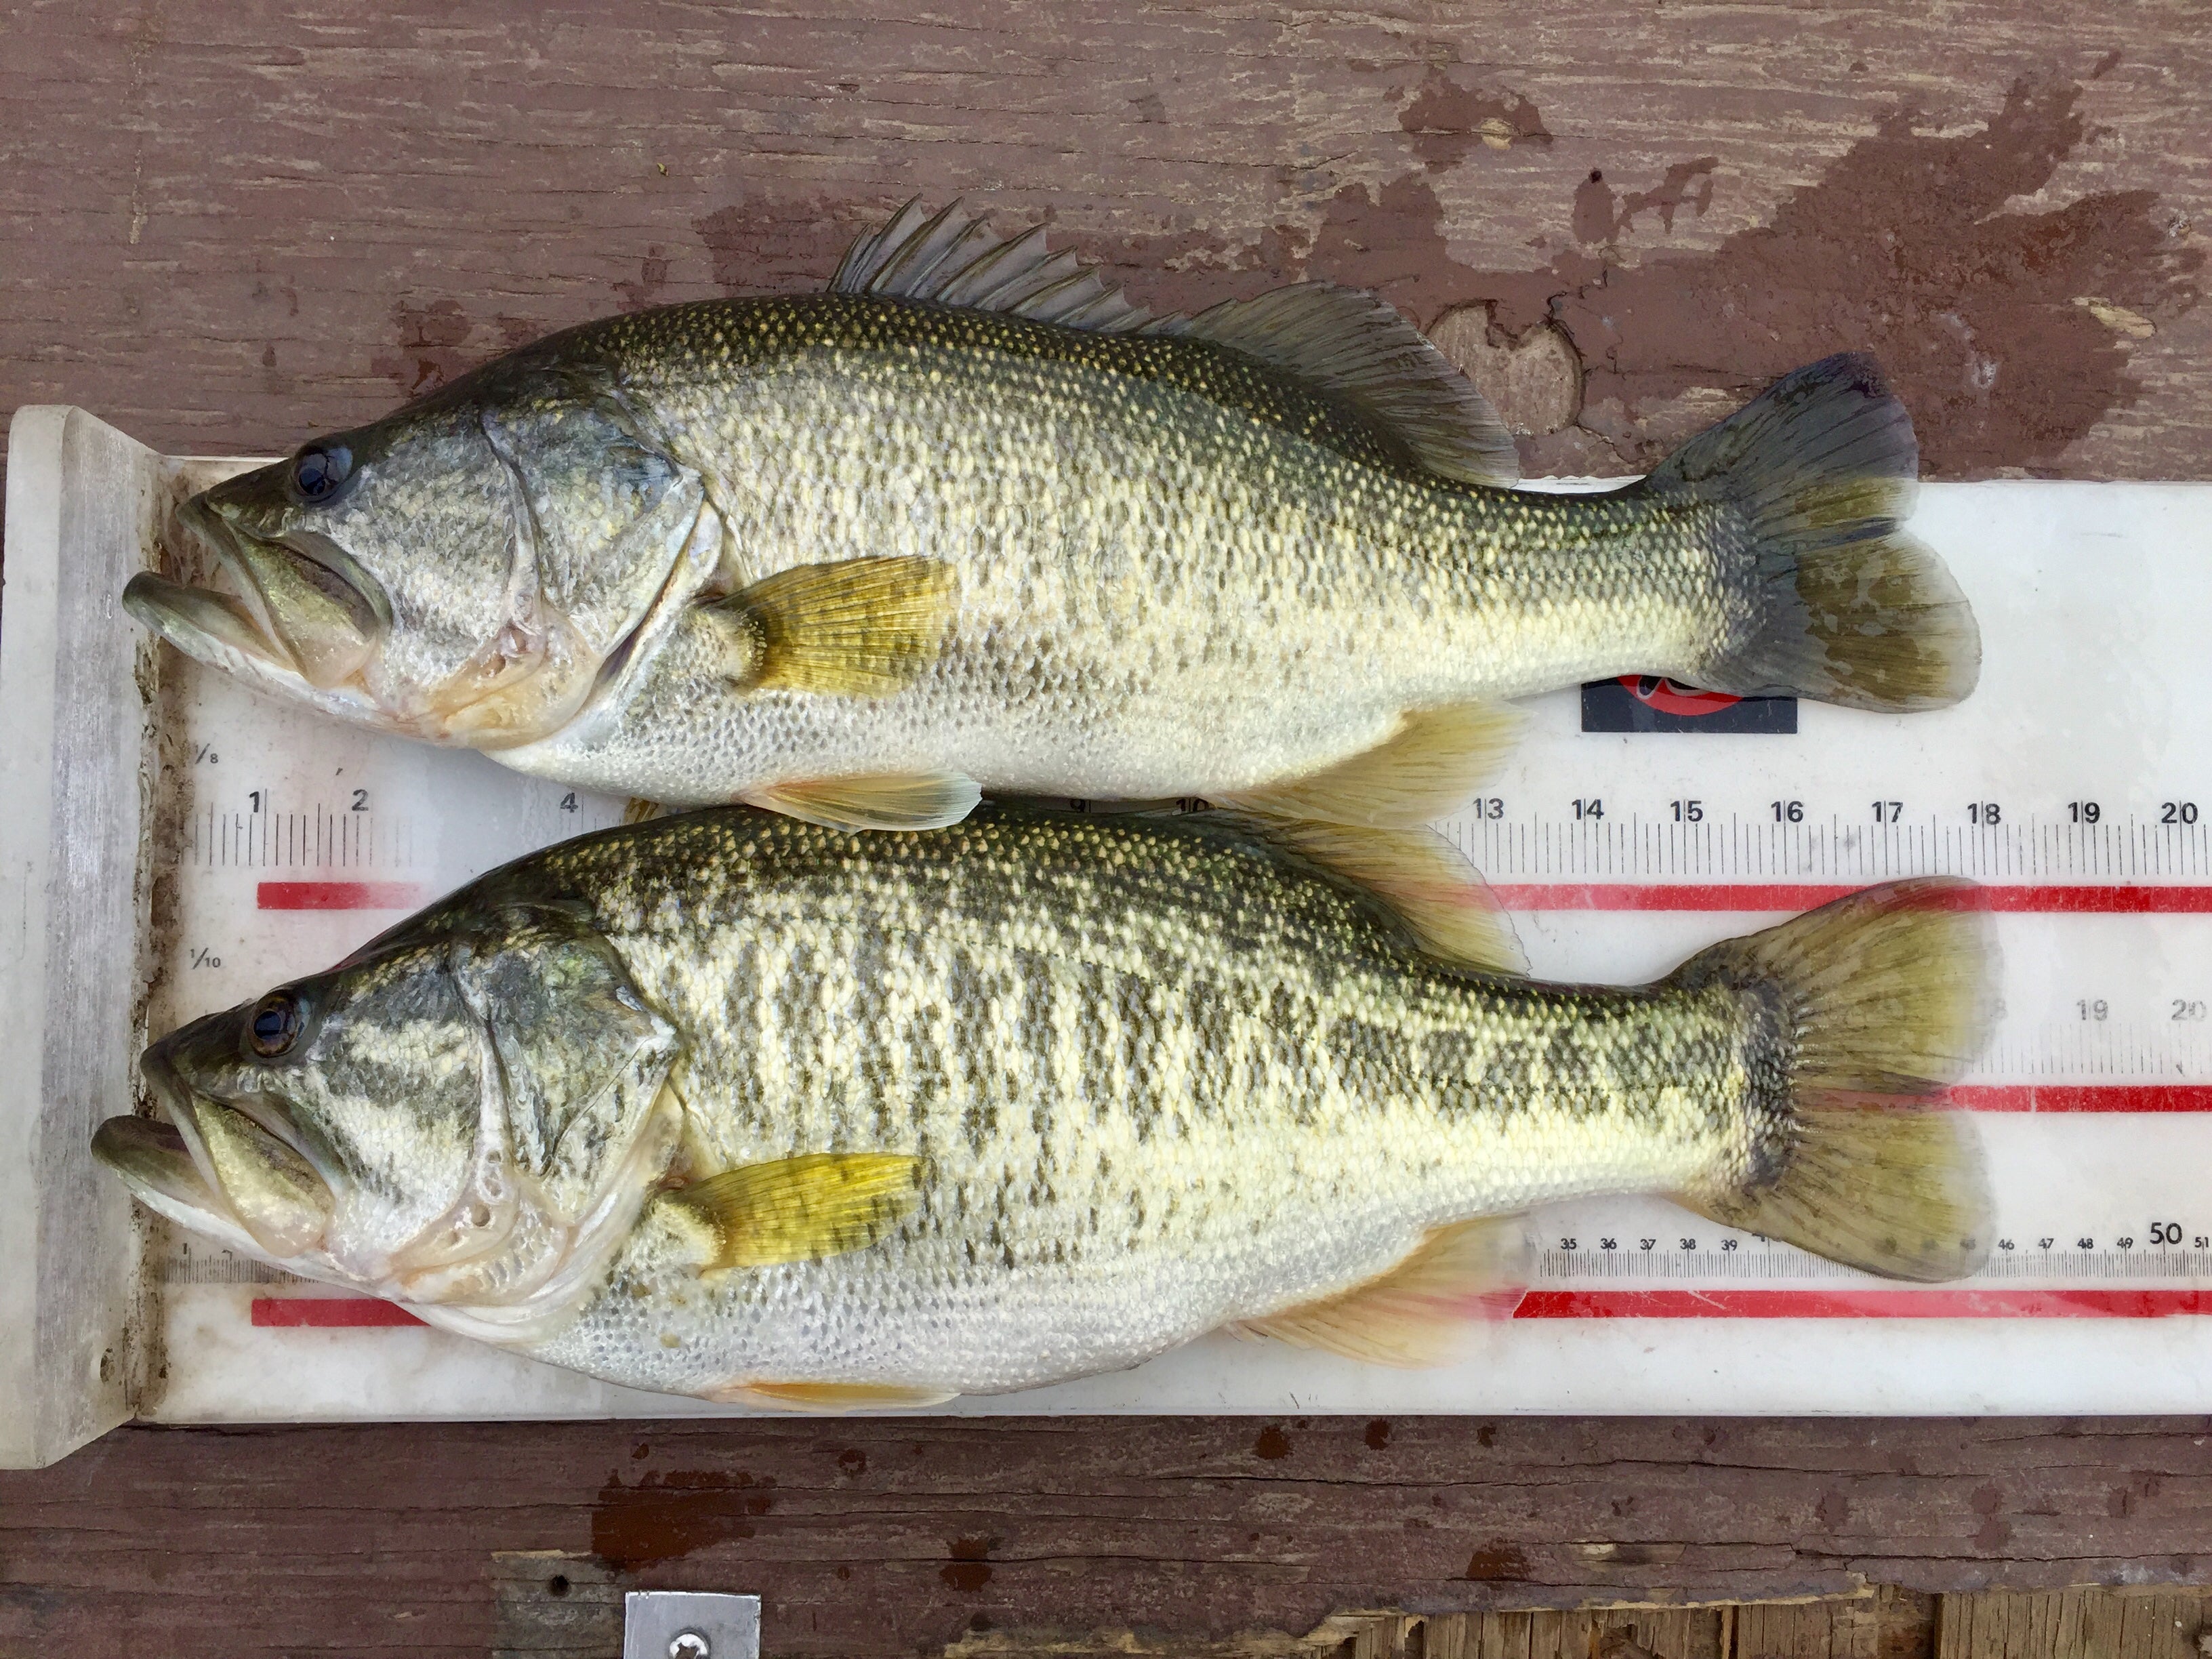 A catch-and-release regulation on largemouth bass is in effect at Fayette County Public Fishing Lake to allow the original stock to reach a larger size. Daily creel limits and other regulations will be posted at kiosks around the lake.